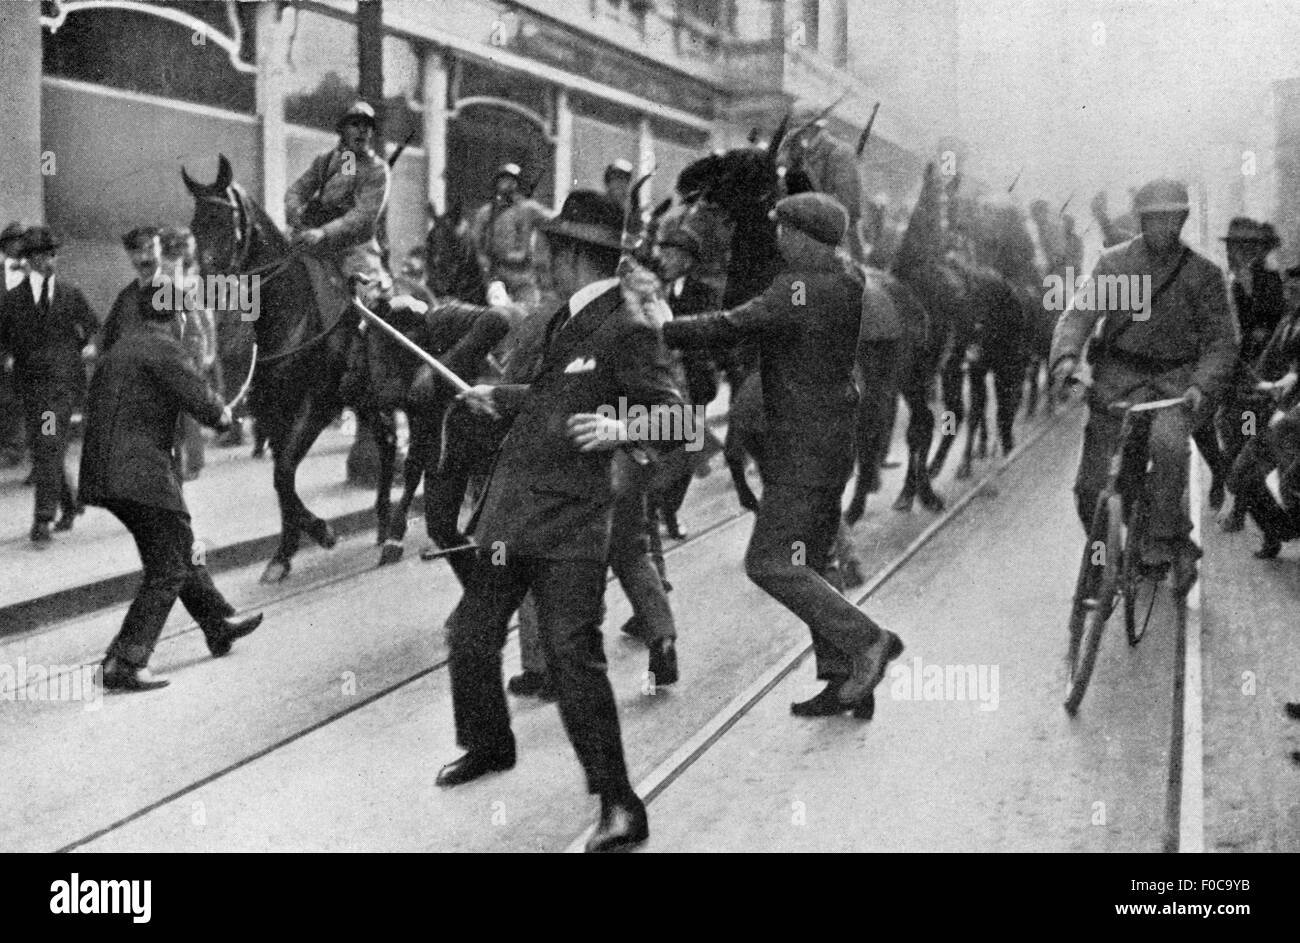 occupation of the Ruhr Area and the Rhineland 1920 - 1923,Rhenish separatists beating up a policeman,Duesseldorf,1923,French soldiers,military,occupation force,separatism,violence,violent,police,constable,men,man,crowd,crowds,crowds of people,politics,policy,Ruhr conflict,Germany,Weimar Republic,German Reich,Free State of Prussia,Rhine Province,1920s,20s,20th century,occupation,occupations,Ruhr area,Ruhr Valley,separatist,separatists,beat up,beating up,beaten up,policeman,policemen,historic,historical,Duesseldorf,Düssel,Additional-Rights-Clearences-Not Available Stock Photo